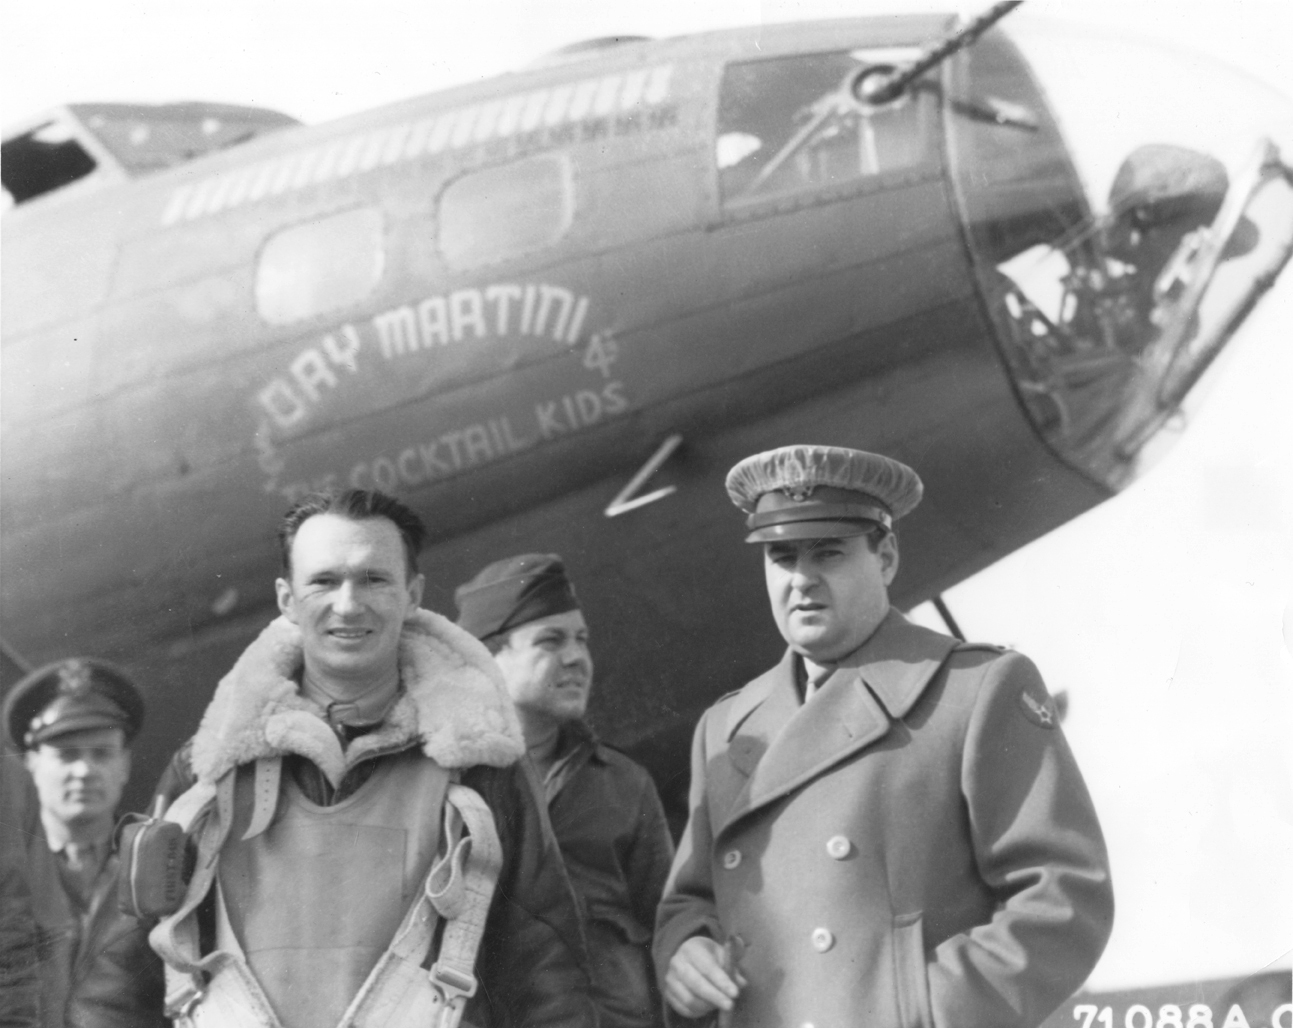 Brigadier General Haywood Hansell and Colonel Curtis LeMay in front of B-17F “Dry Martini – The Cocktail Kids 4” at Chelveston, England, on the occasion of Hansell’s last combat flight, 4 May 1943.